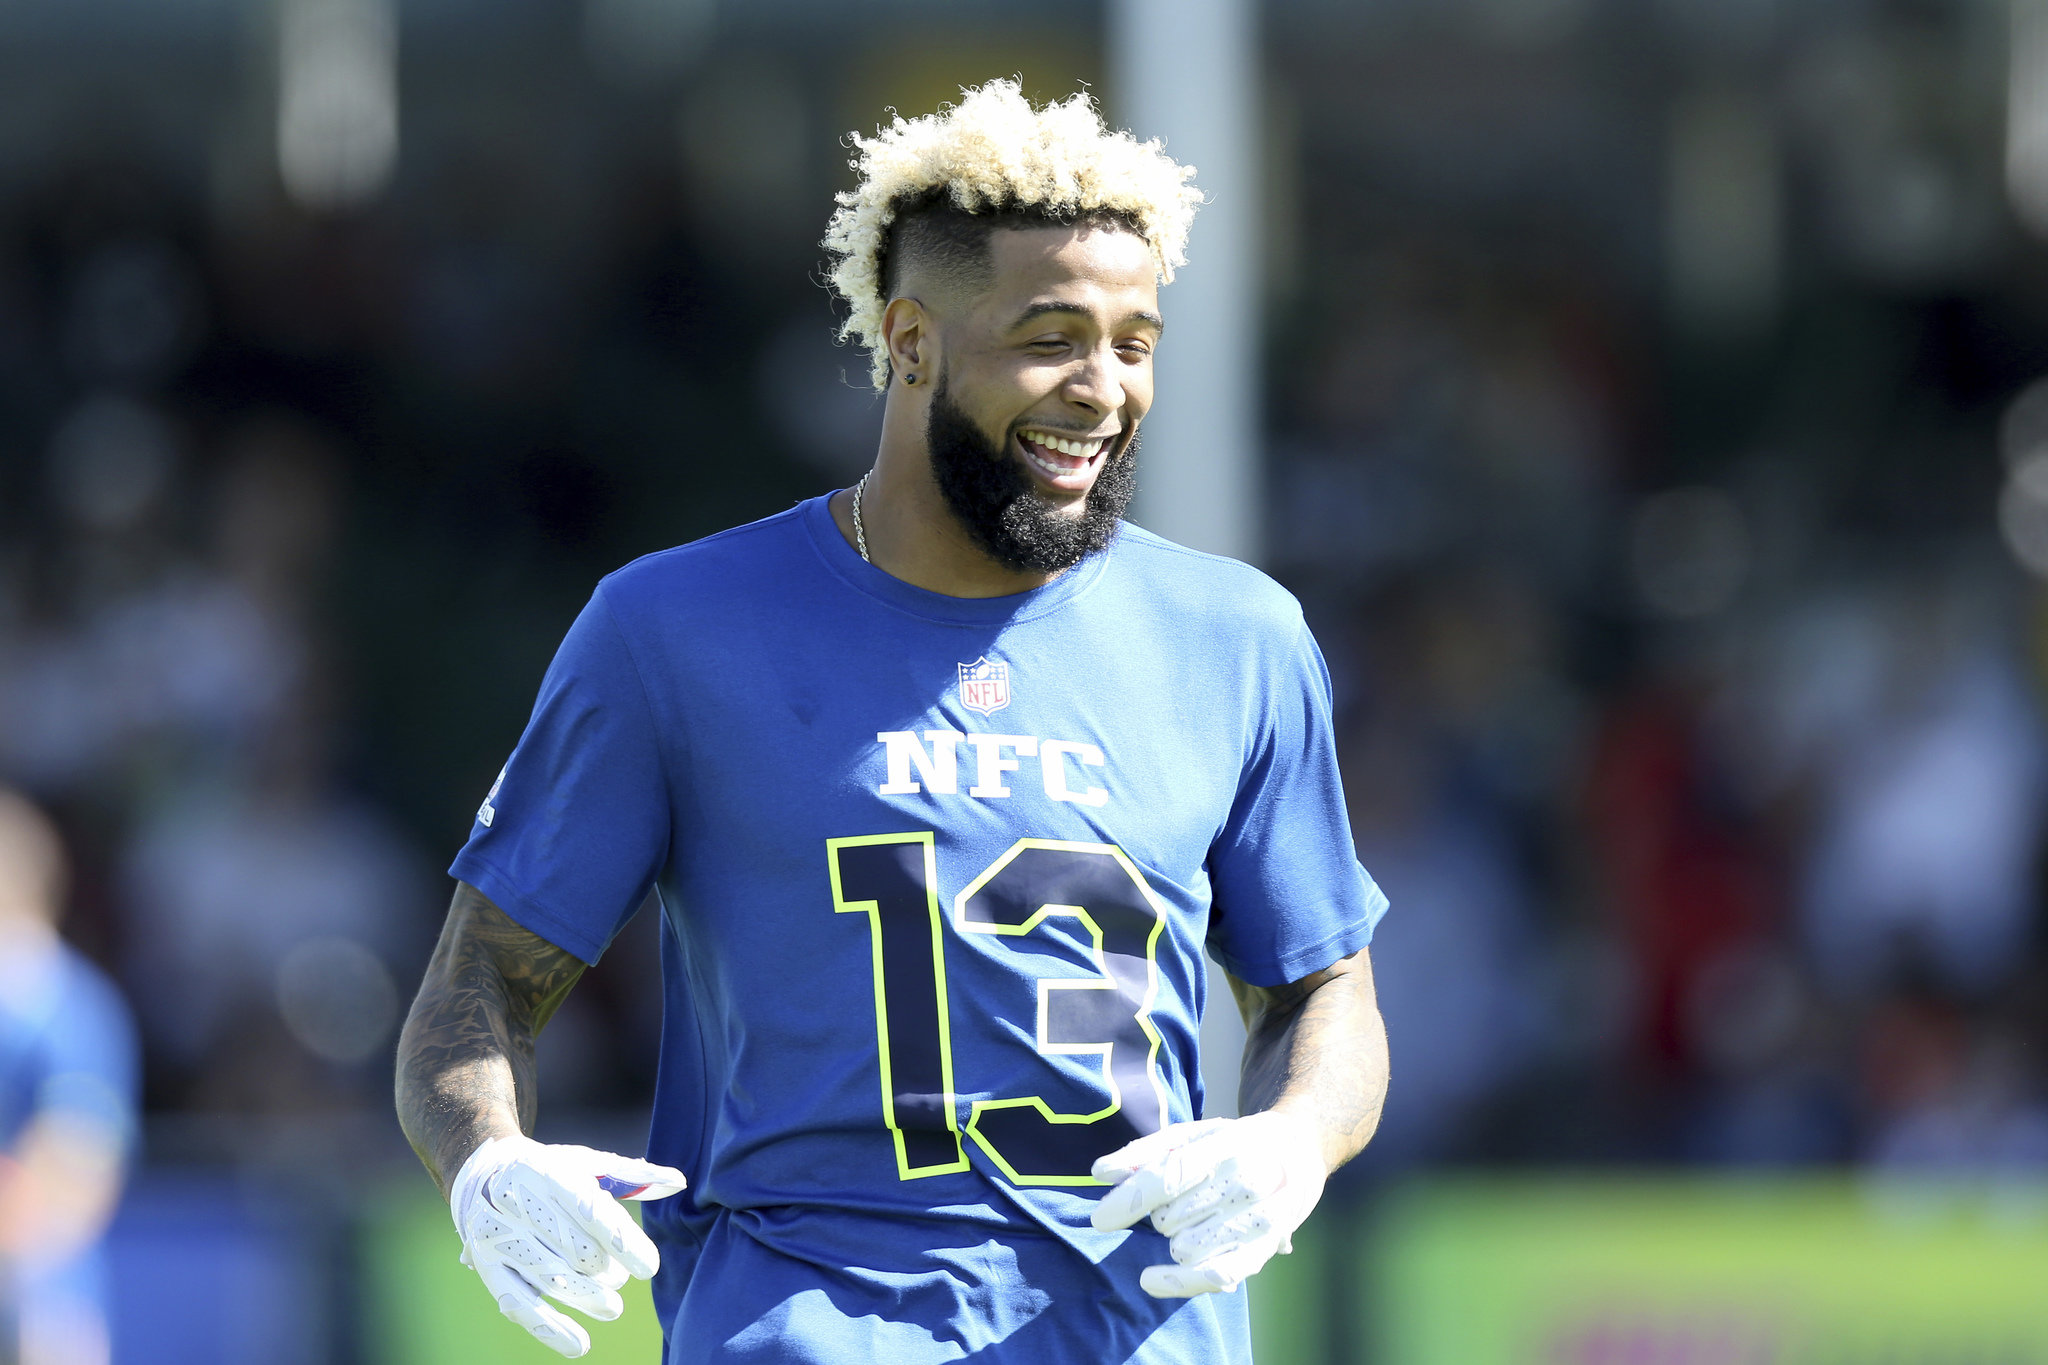 HD wallpaper featuring New York Giants player Odell Beckham Jr. in a blue NFC #13 jersey, smiling on the field.